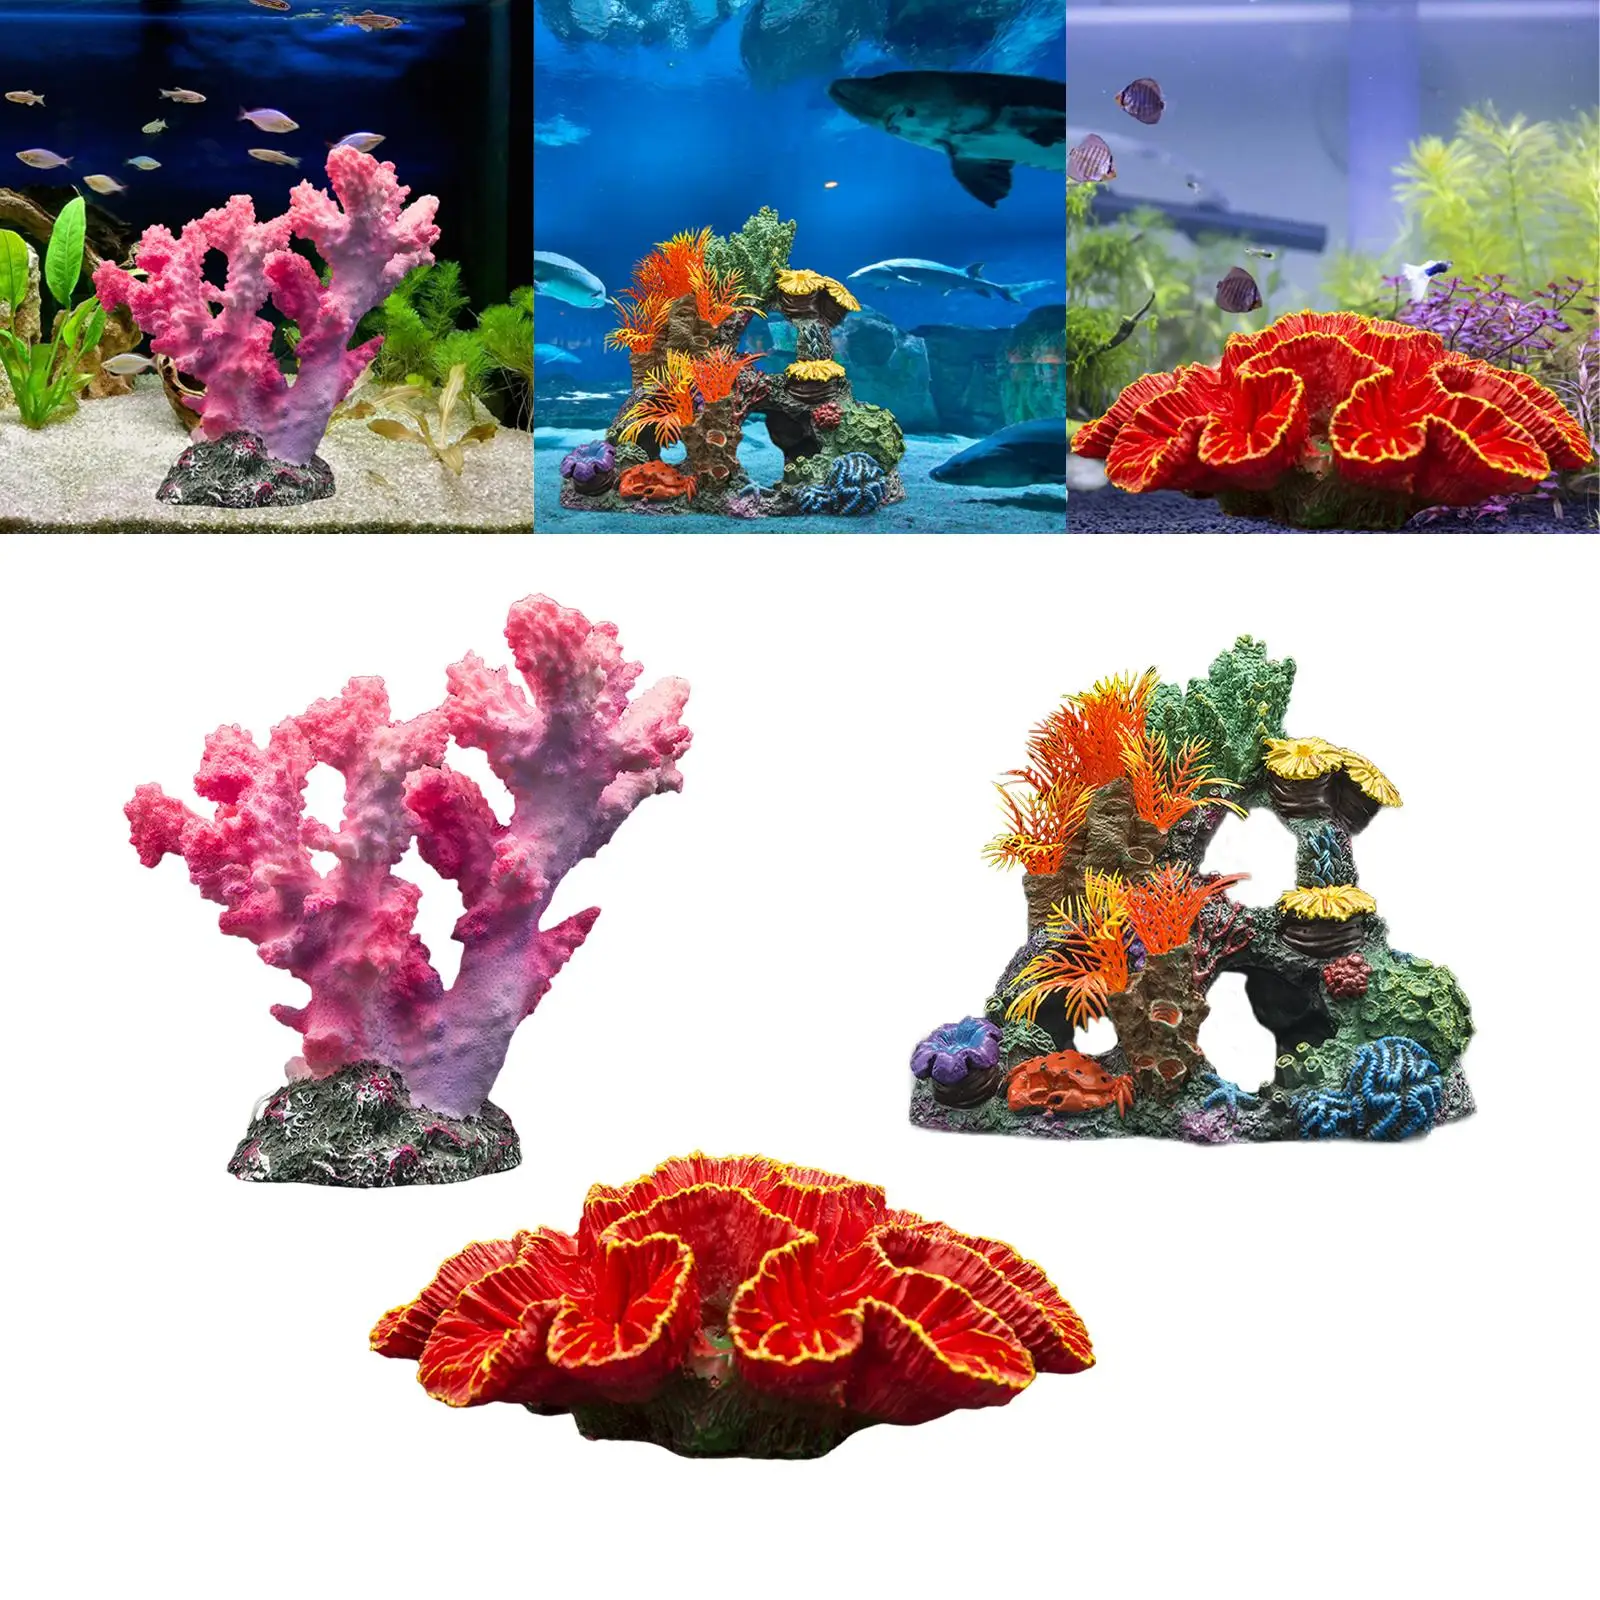 Artificial Coral Simulation Home Furnishings Plants Supplies Resin Aquarium Coral Decor Saltwater Fish Tank Landscaping